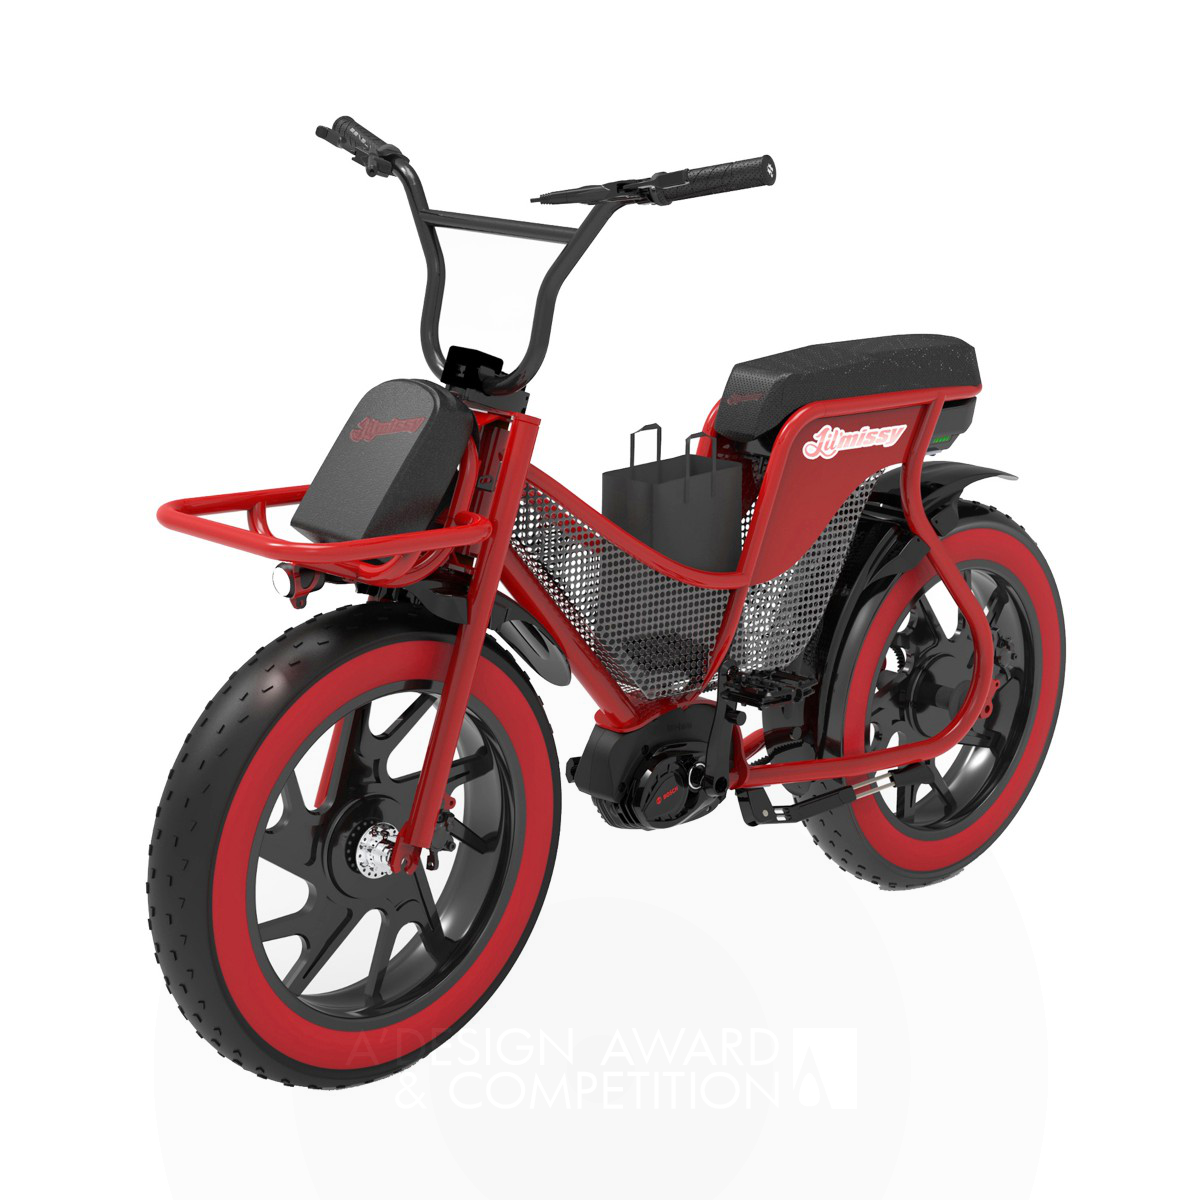 Lilmissy Electric Bicycle by Asbjoerk Stanly Mogensen Iron Vehicle, Mobility and Transportation Design Award Winner 2022 